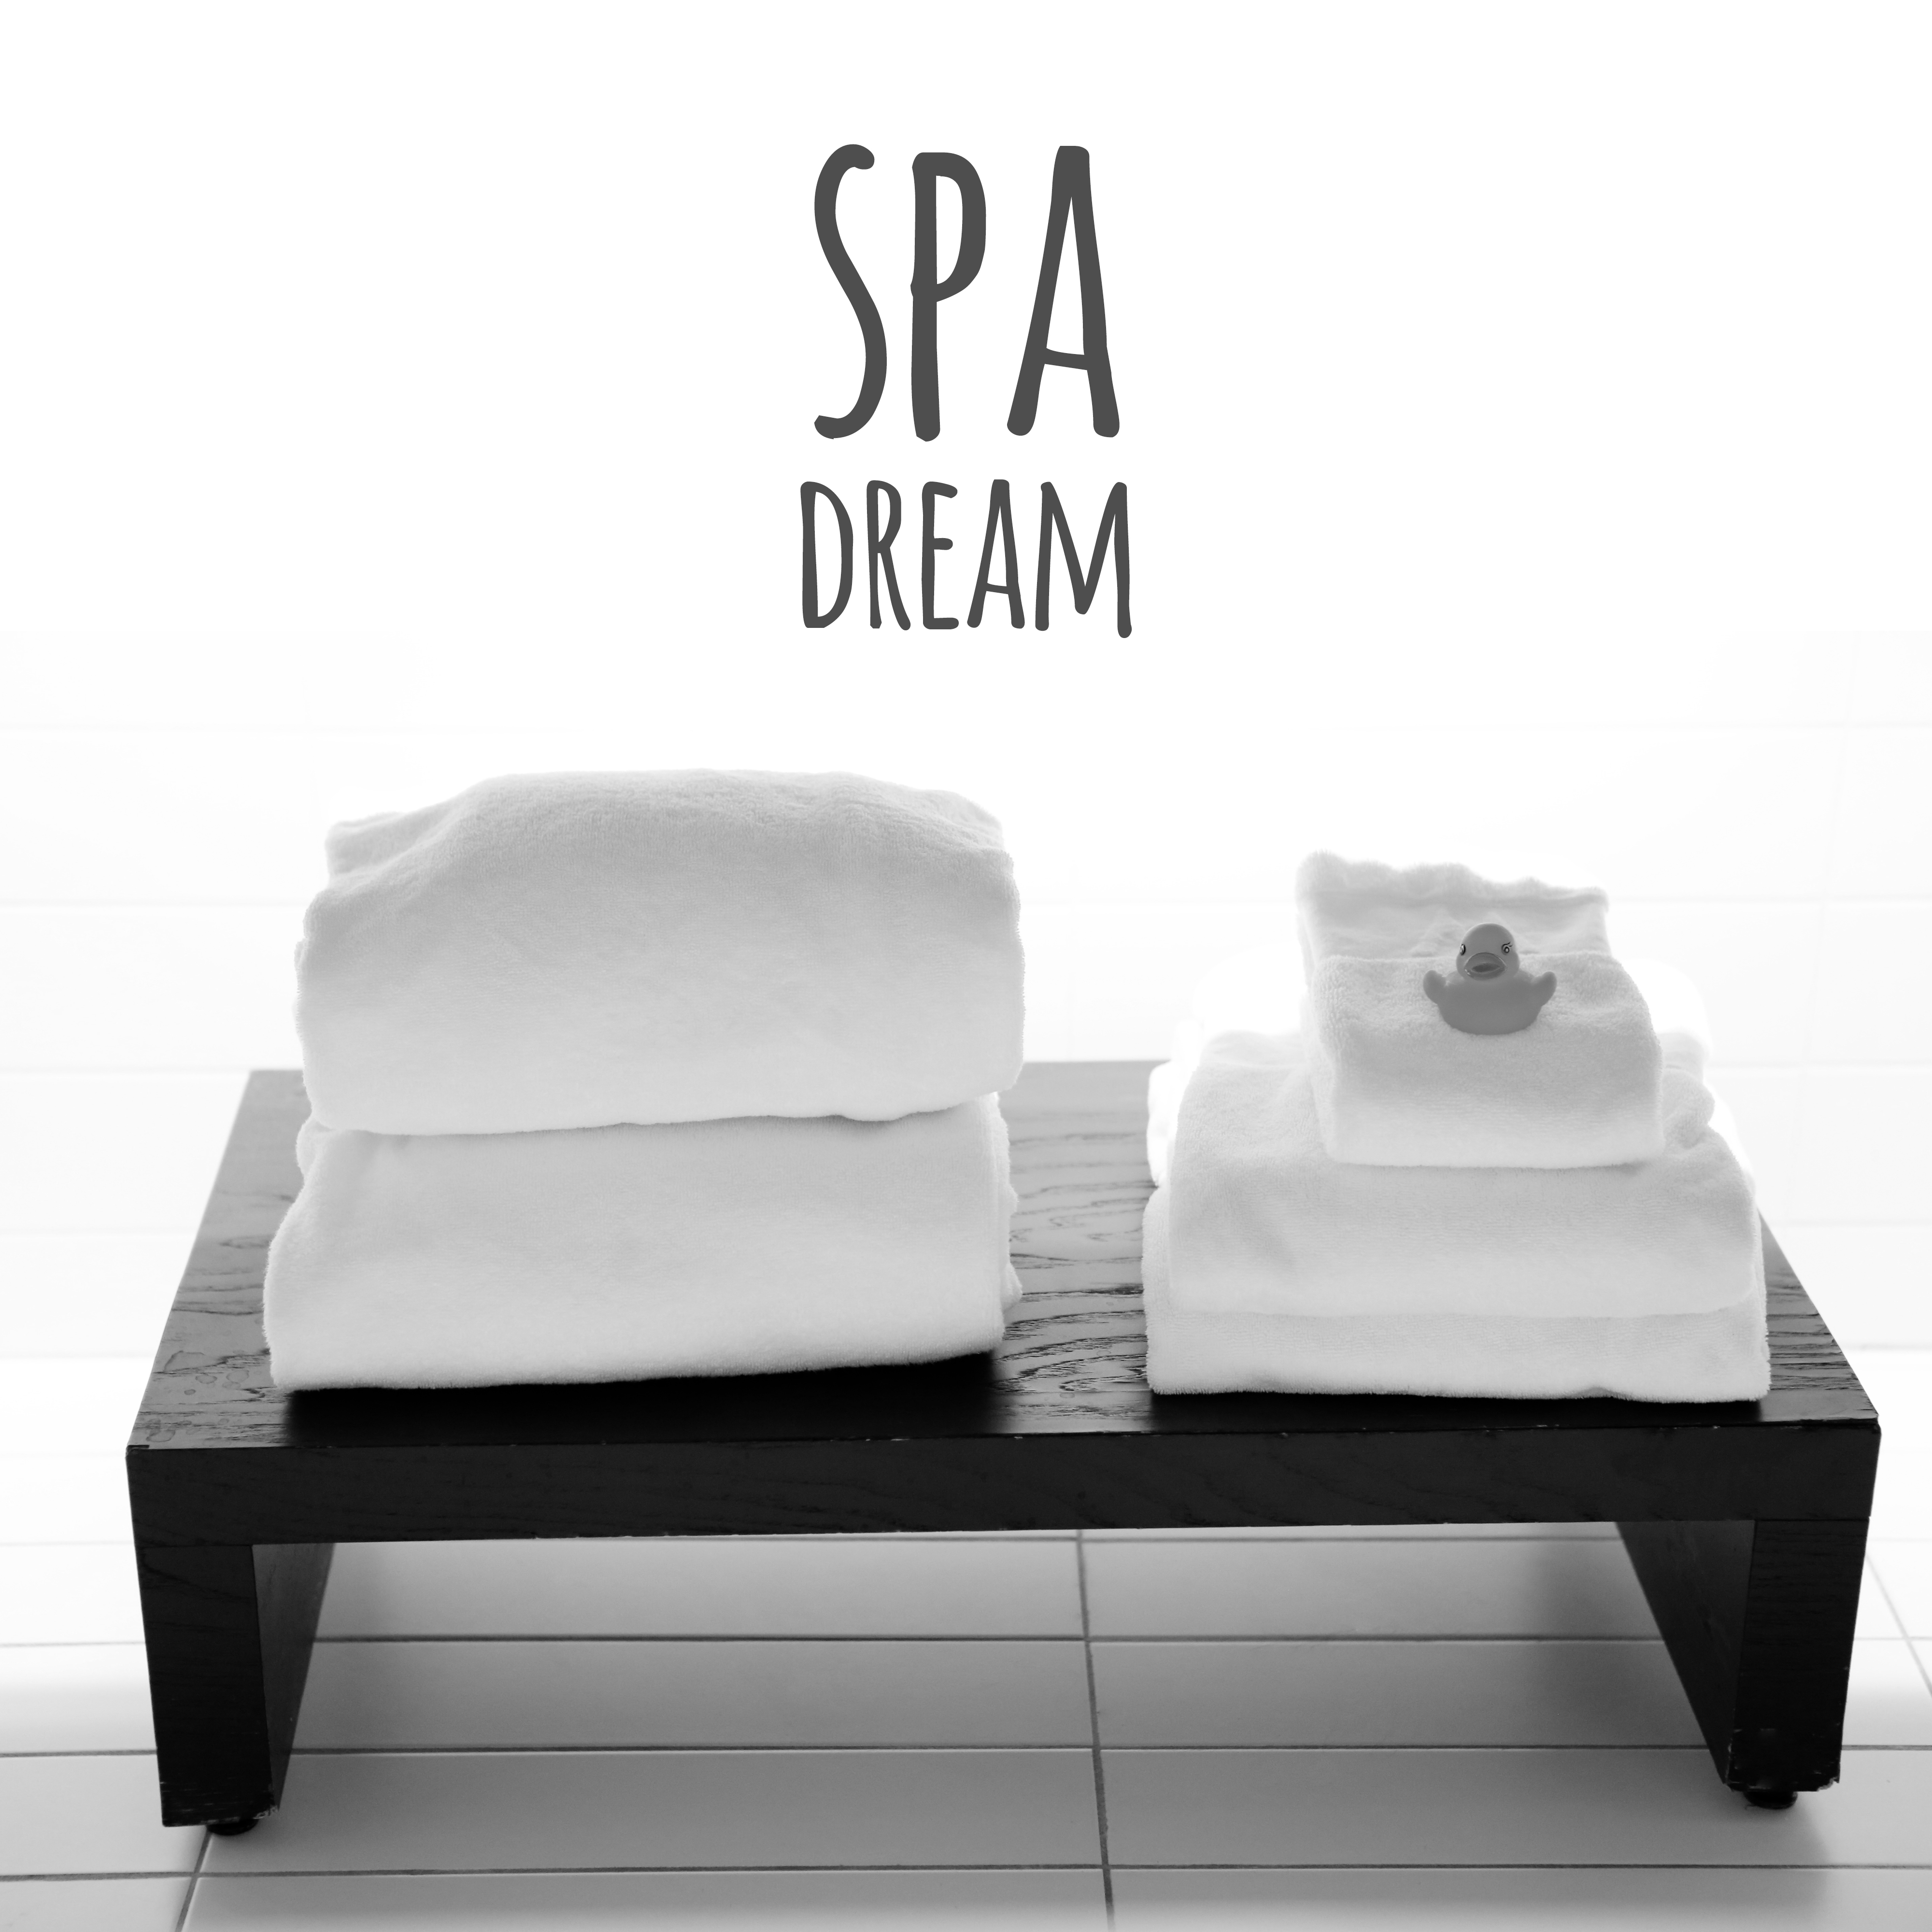 Spa Dream  Best Spa Music for Time to Relax in Spa Hotel, Wonderful Sounds of Nature for Deep Relax, Spa Massage Music, Spa Music